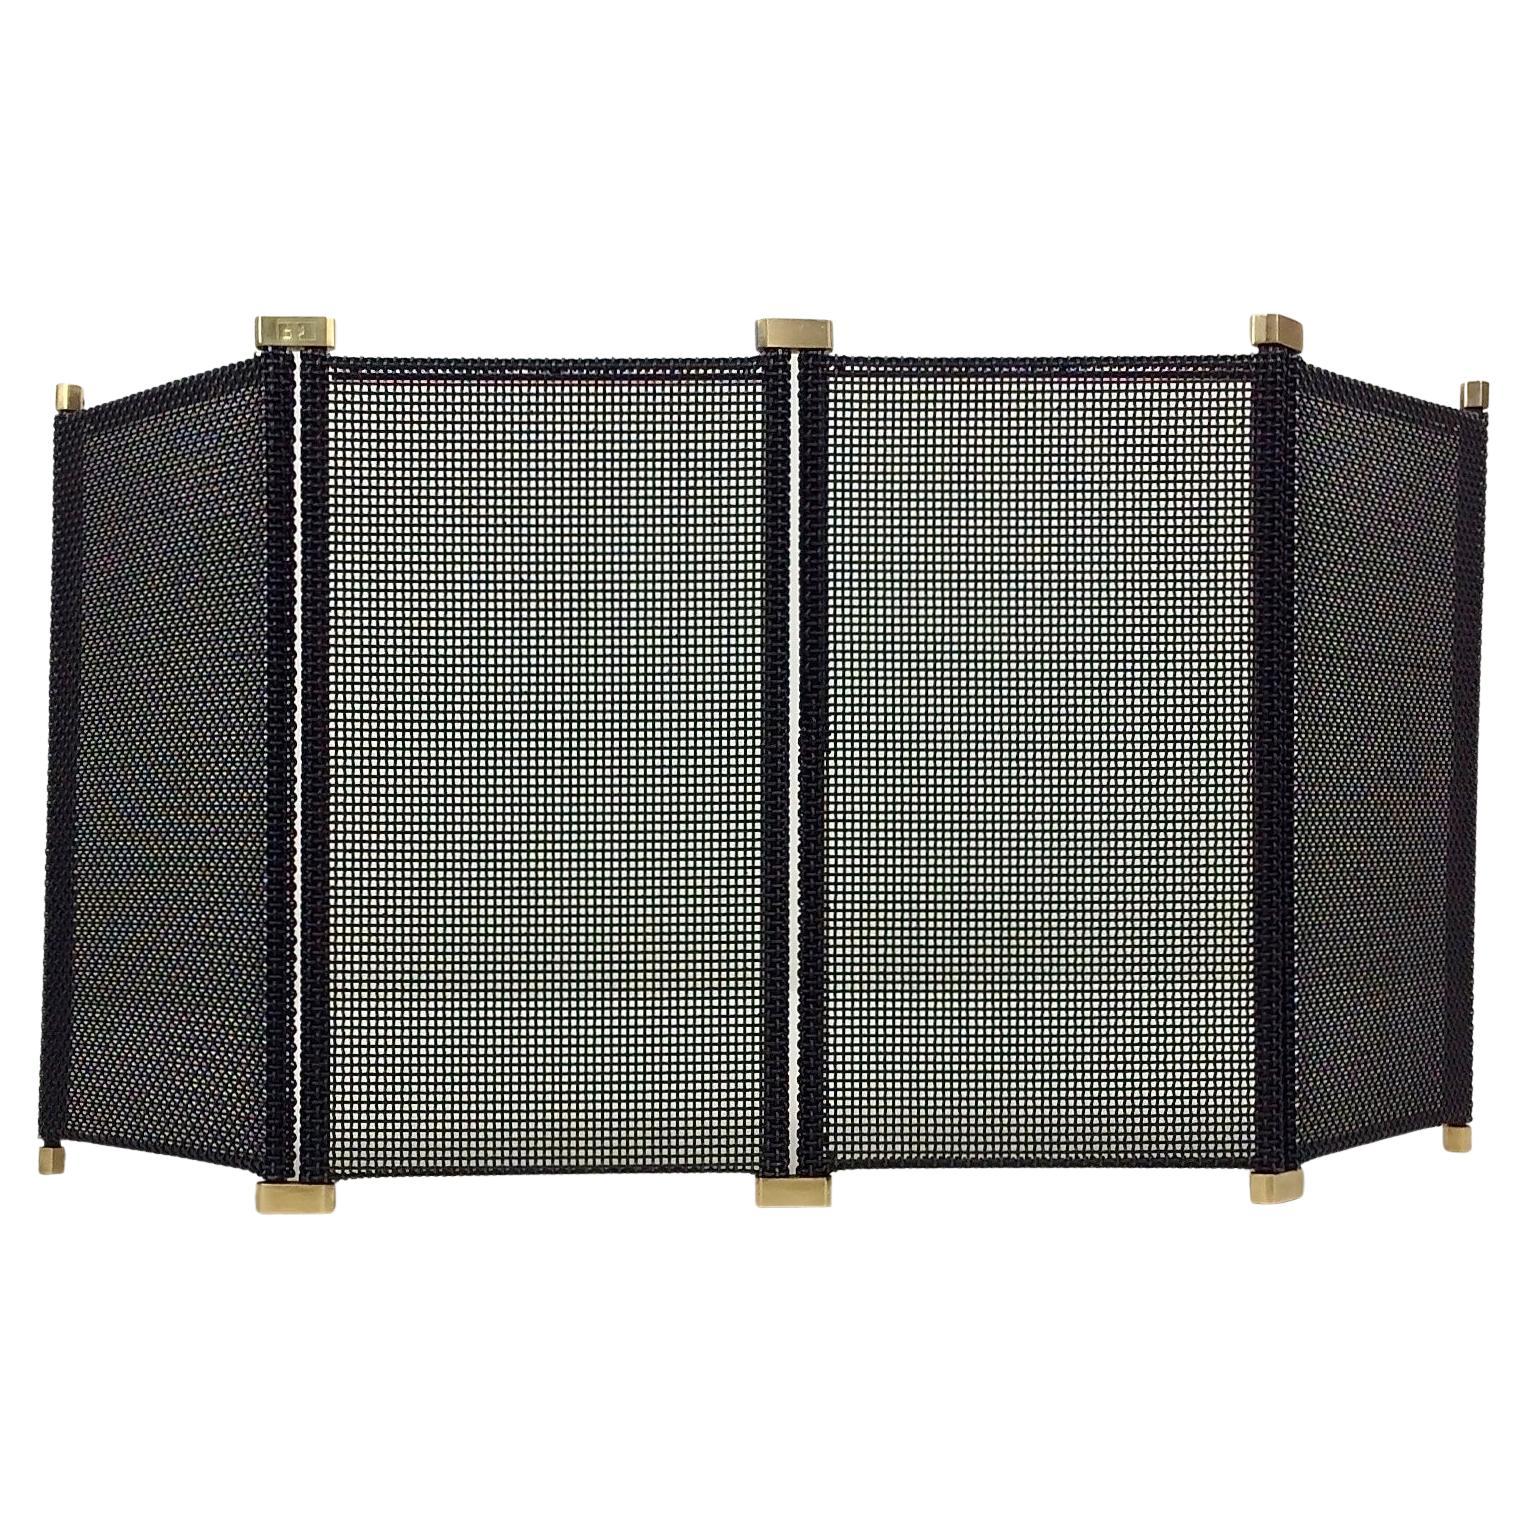 Afra and Tobia Scarpa adjustable fireplace screen for Dimensione Fuoco, circa 1970, Italy.
Black metal folding and adjustable fireplace screen with three sections and brass details.
Dimensions: 4 panels, each one is 24 W x 45 H, maximum extension: